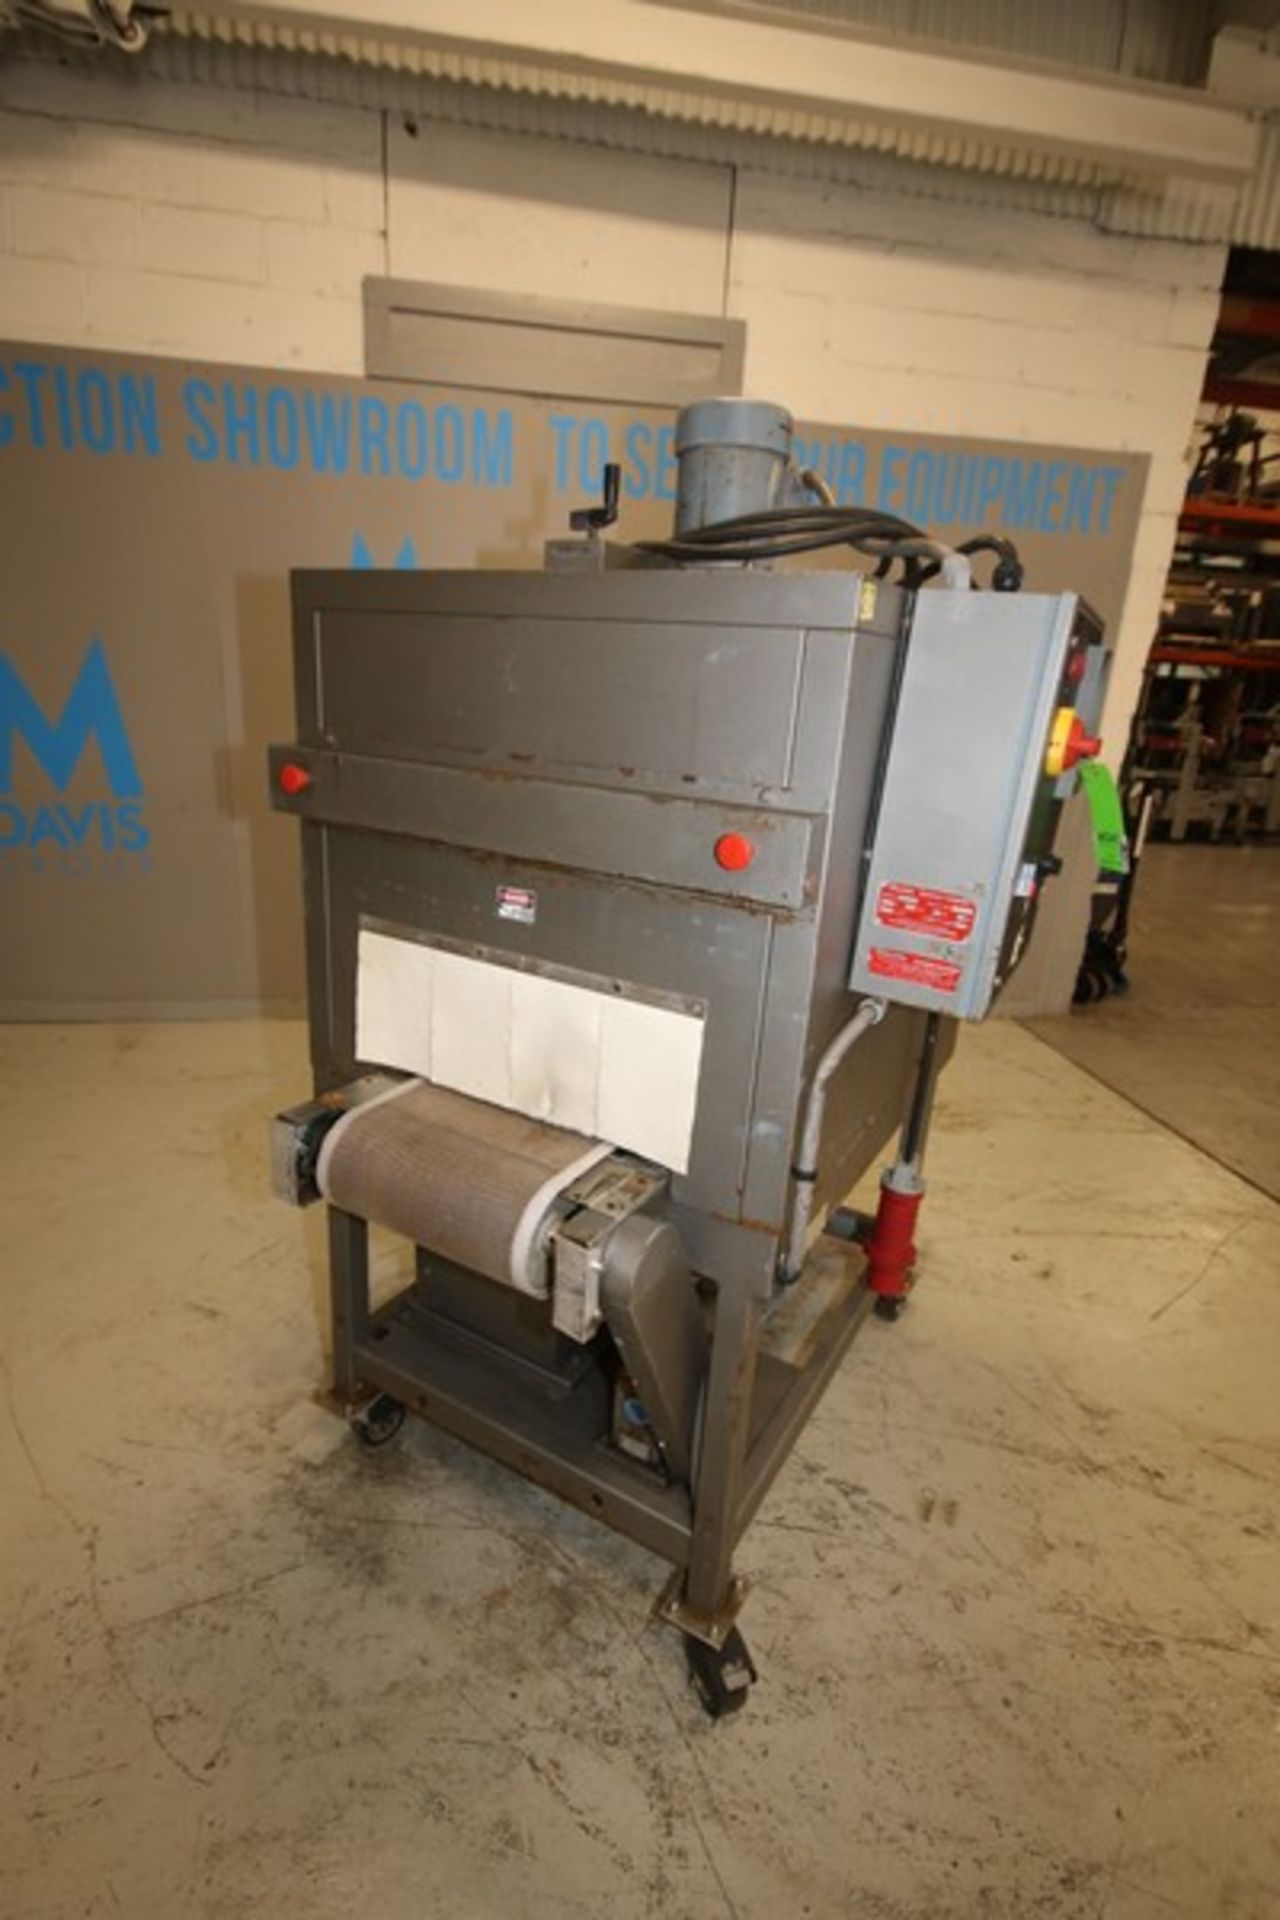 Shanklin 15" W x 9"H, Shrink Wrap Heat Tunnel, Model T-7XL, SN T-96342, 460 V 3 Phase, Mounted on - Image 3 of 10